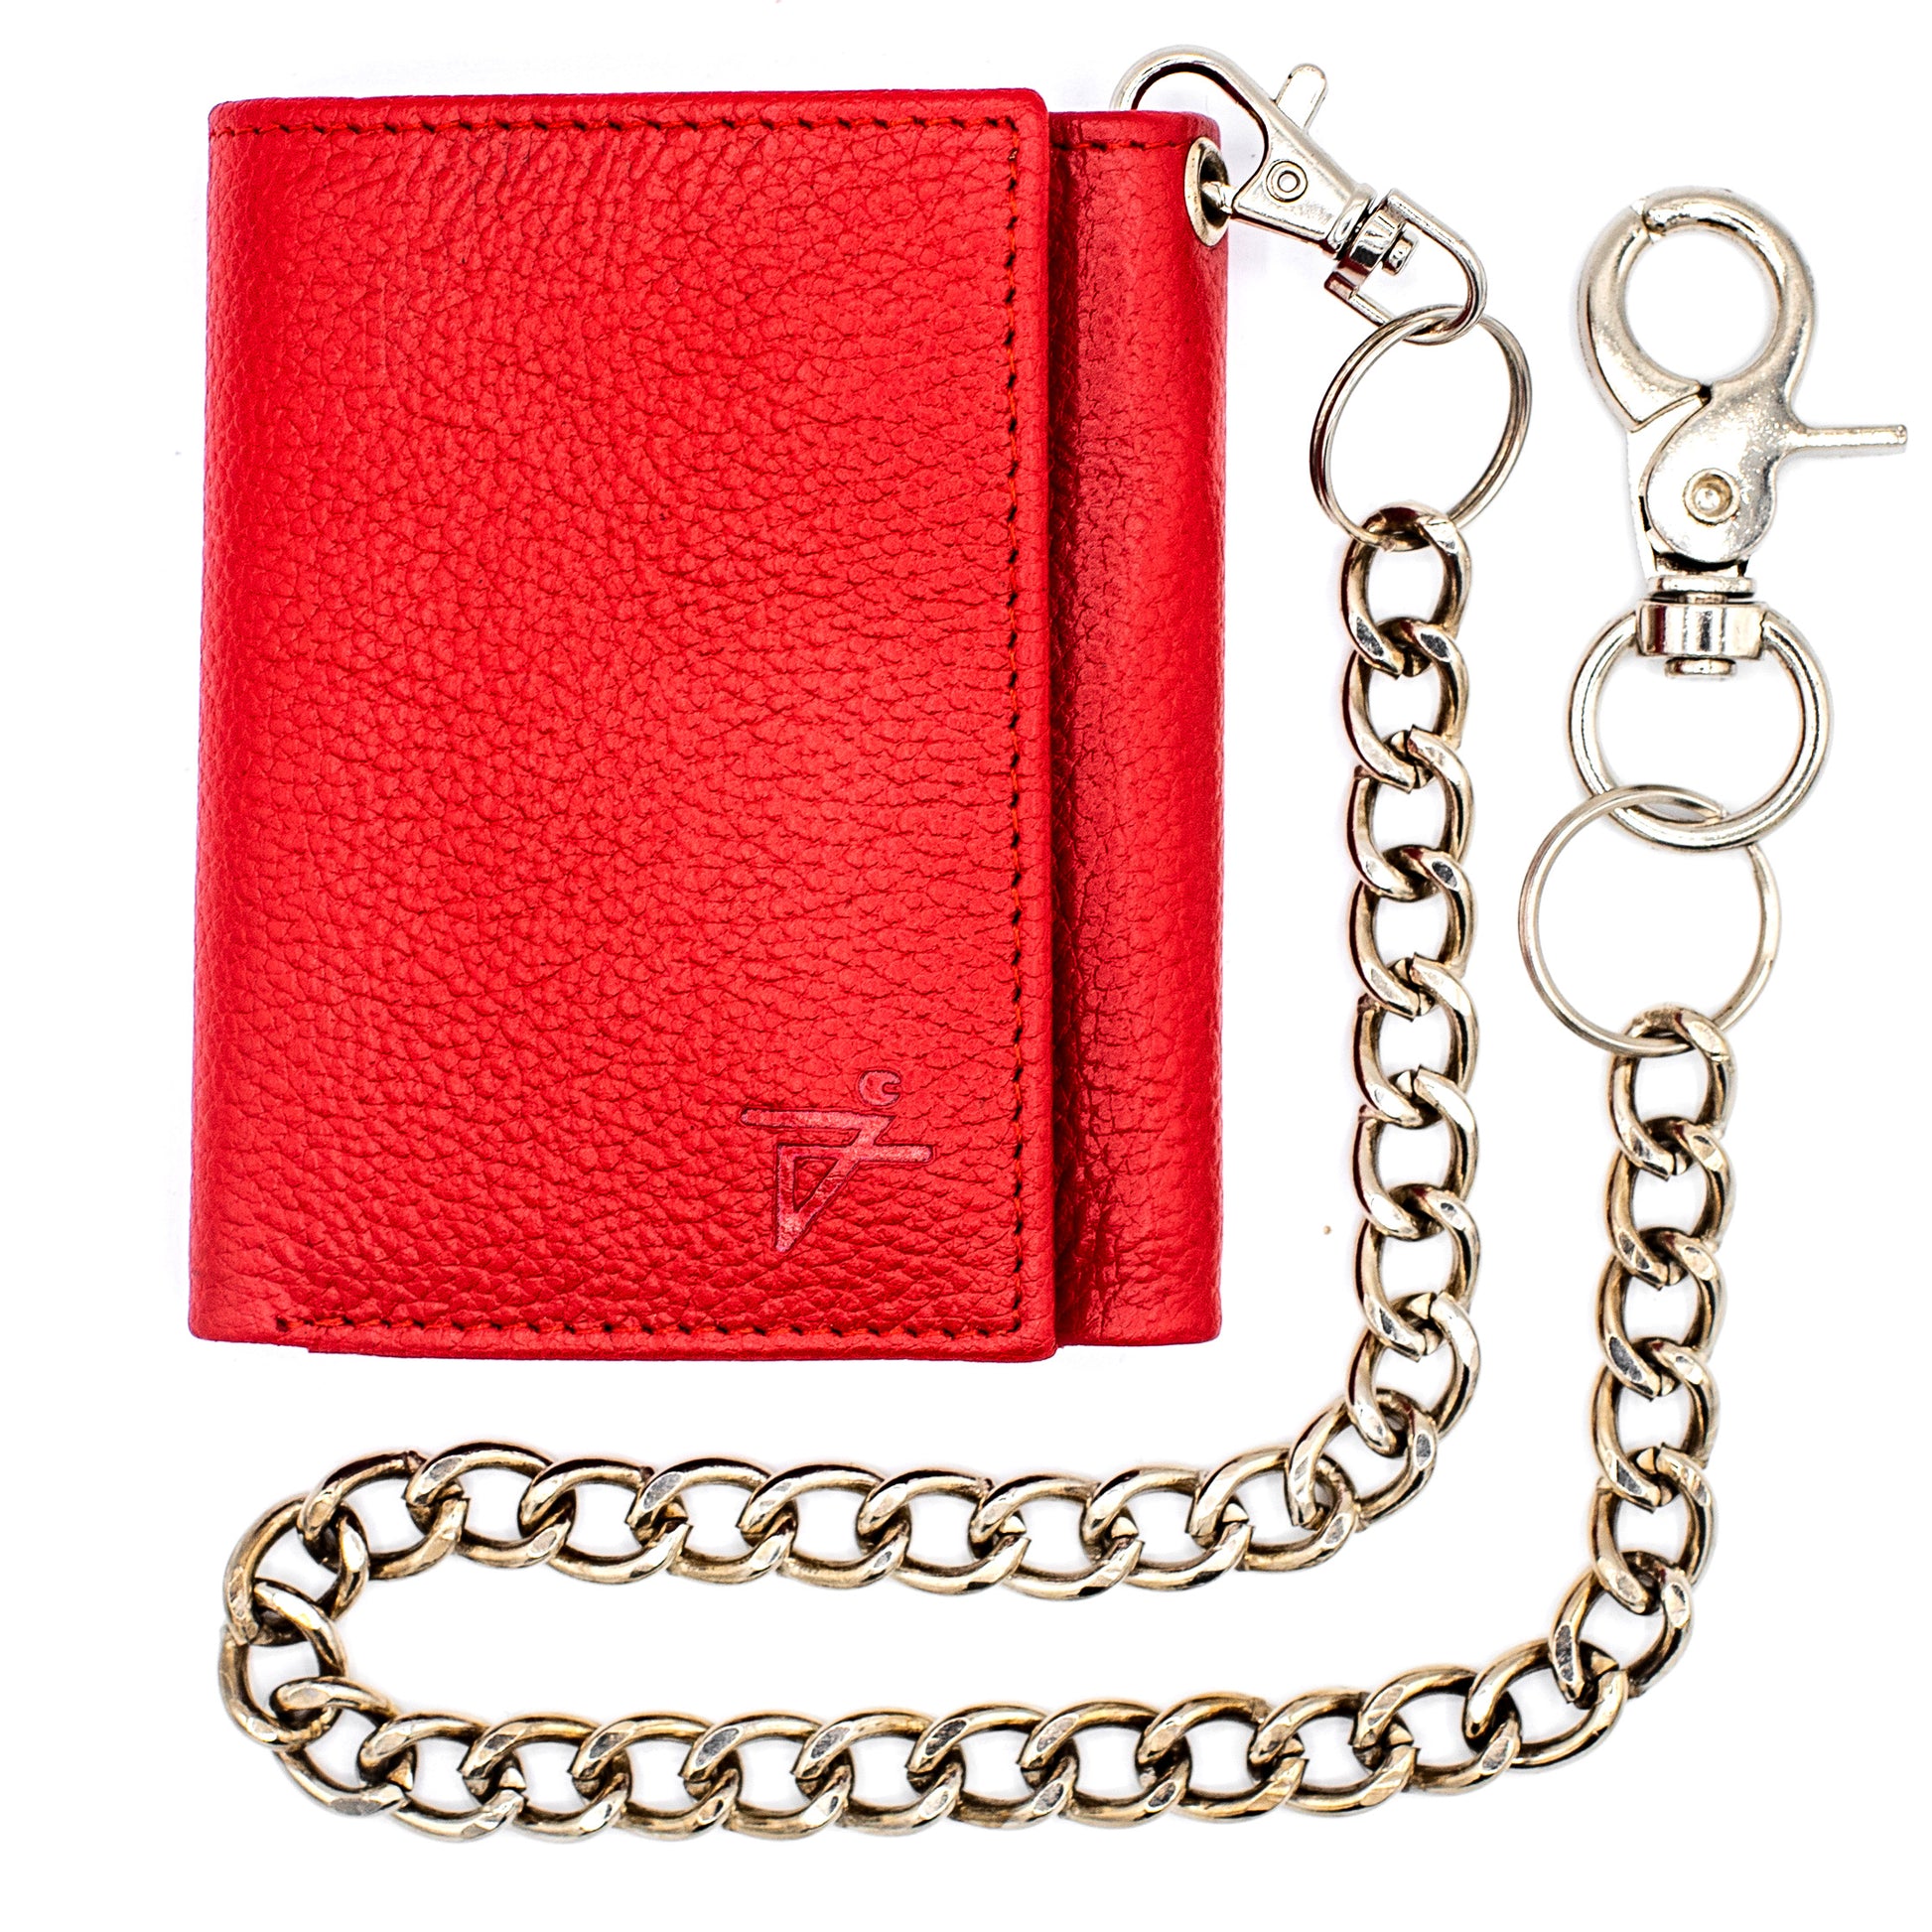 Supreme x Louis Vuitton Wallet And Key Holder in Red